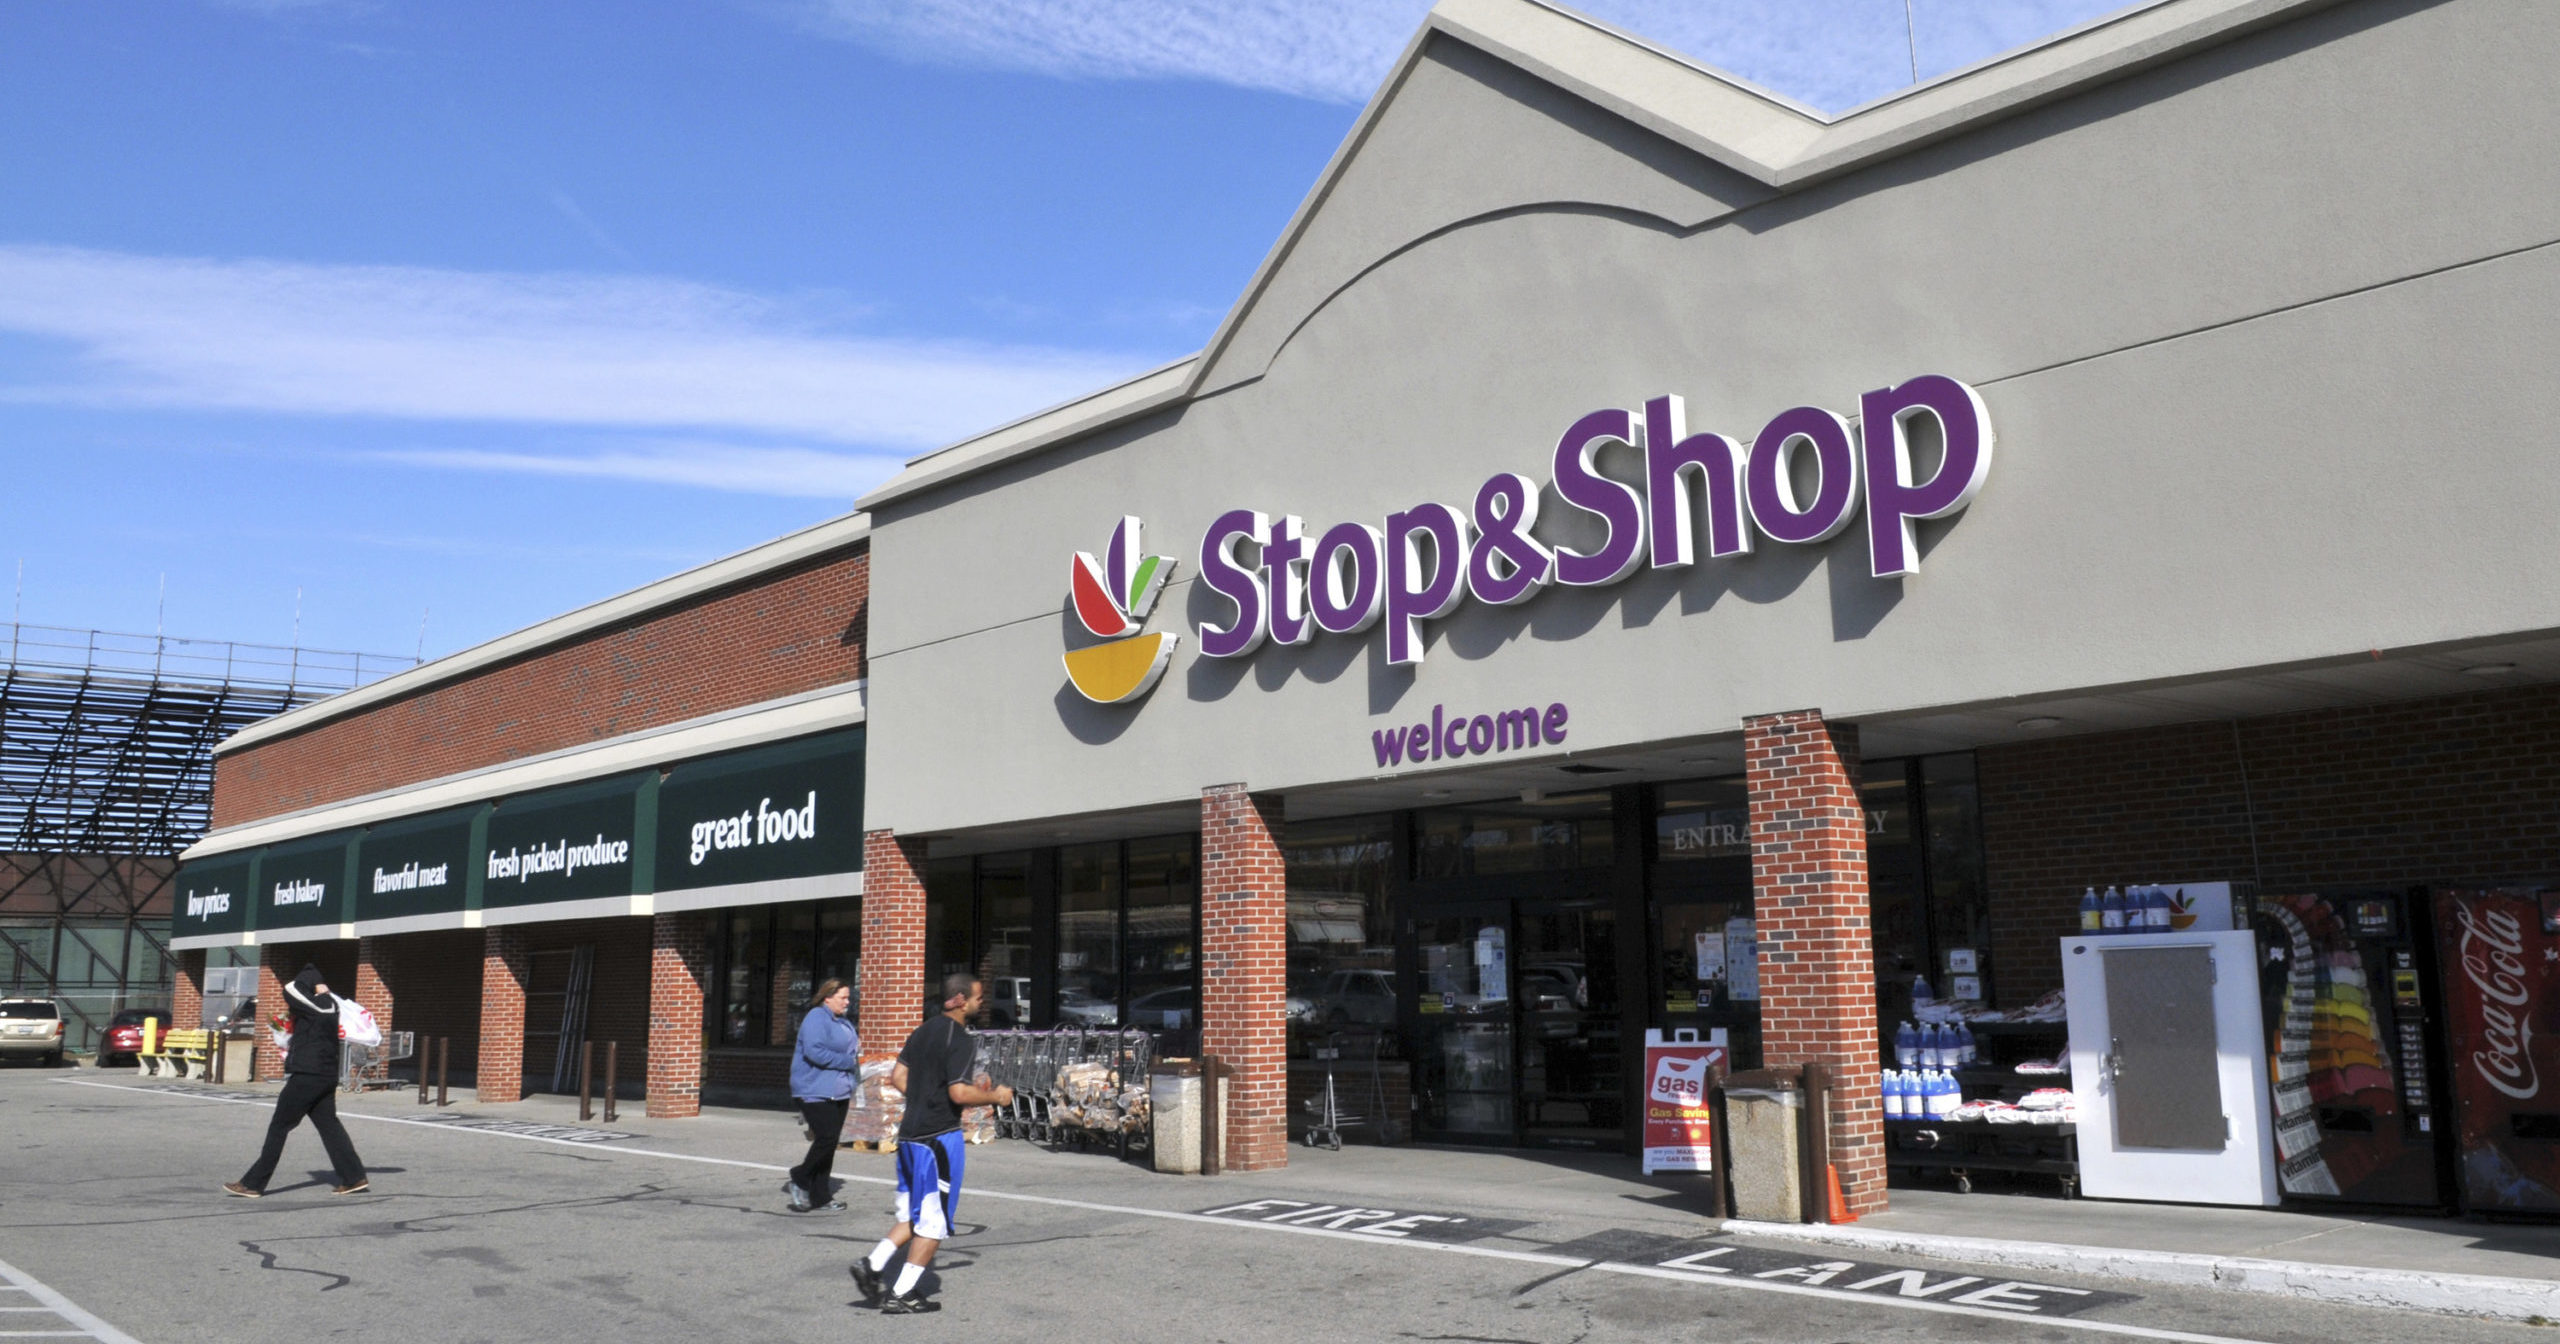 110-Year-Old Grocery Chain Stop & Shop Announces Closure of 32 Stores